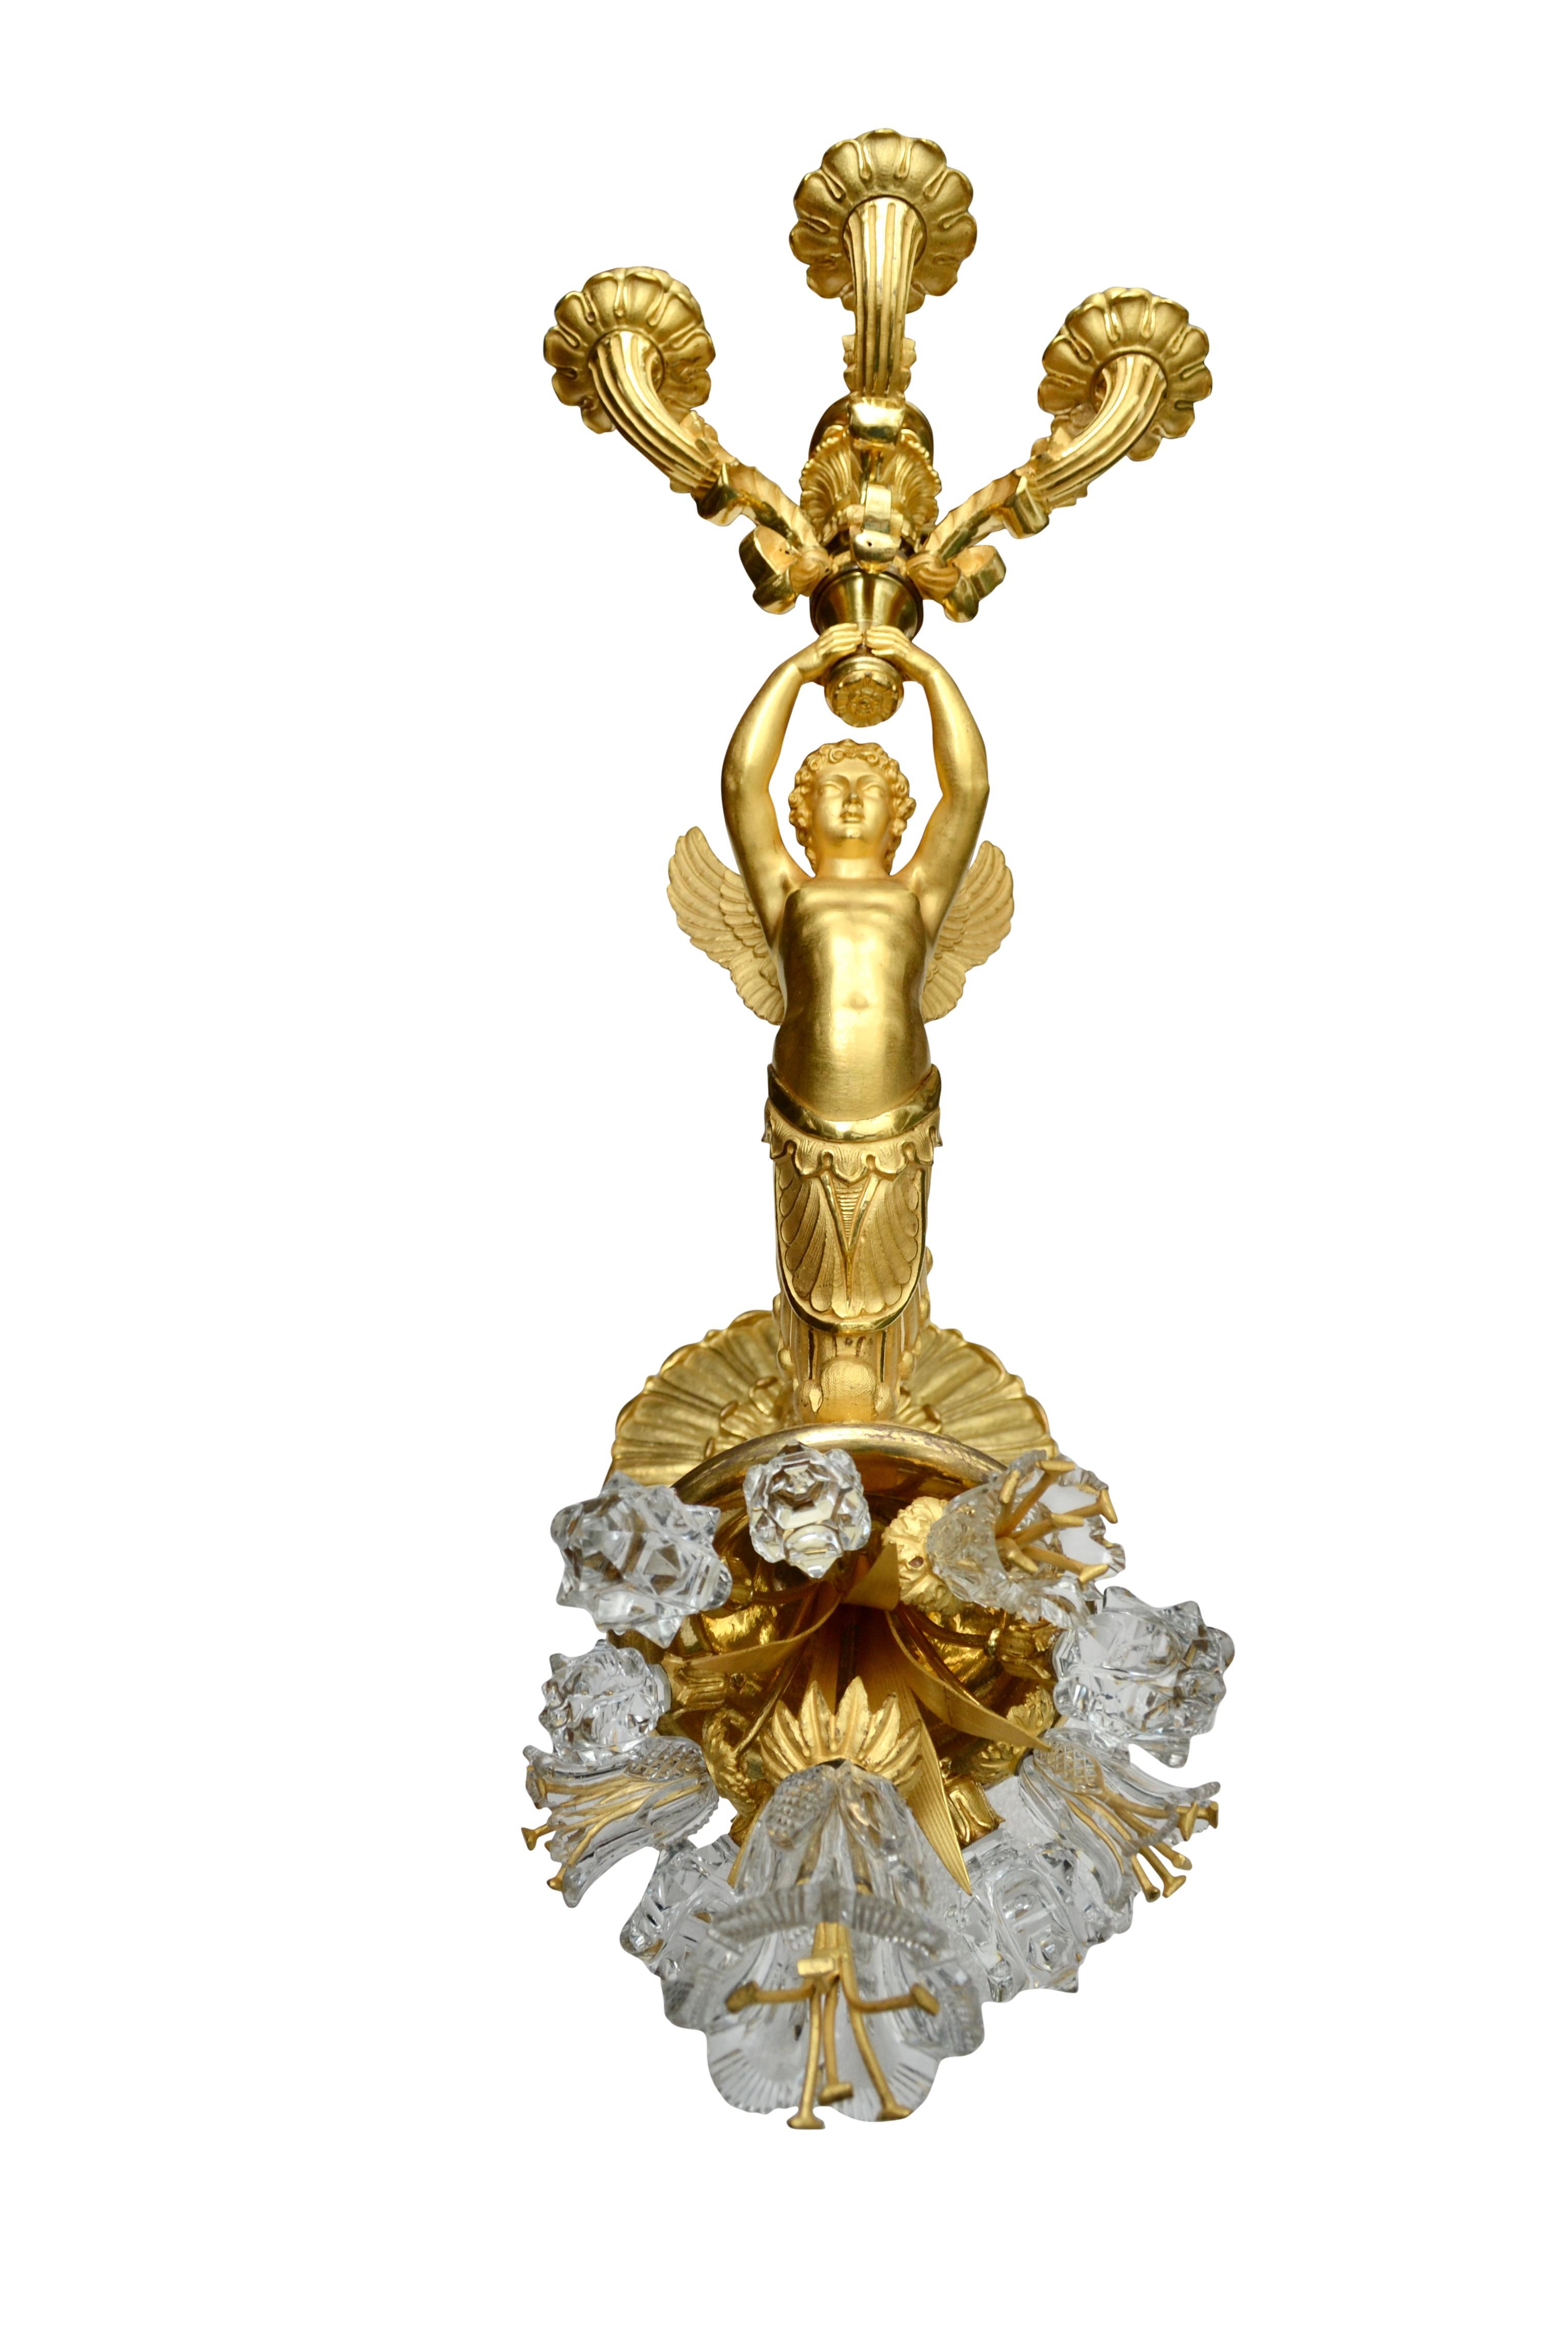 A highly unusual large scale single French Empire wall sconce, the bronze having the finest chasing and gilding ever produced. A winged cupid rides a large cornucopia from which a number of cut crystal flowers and stems germinate. The elaborate